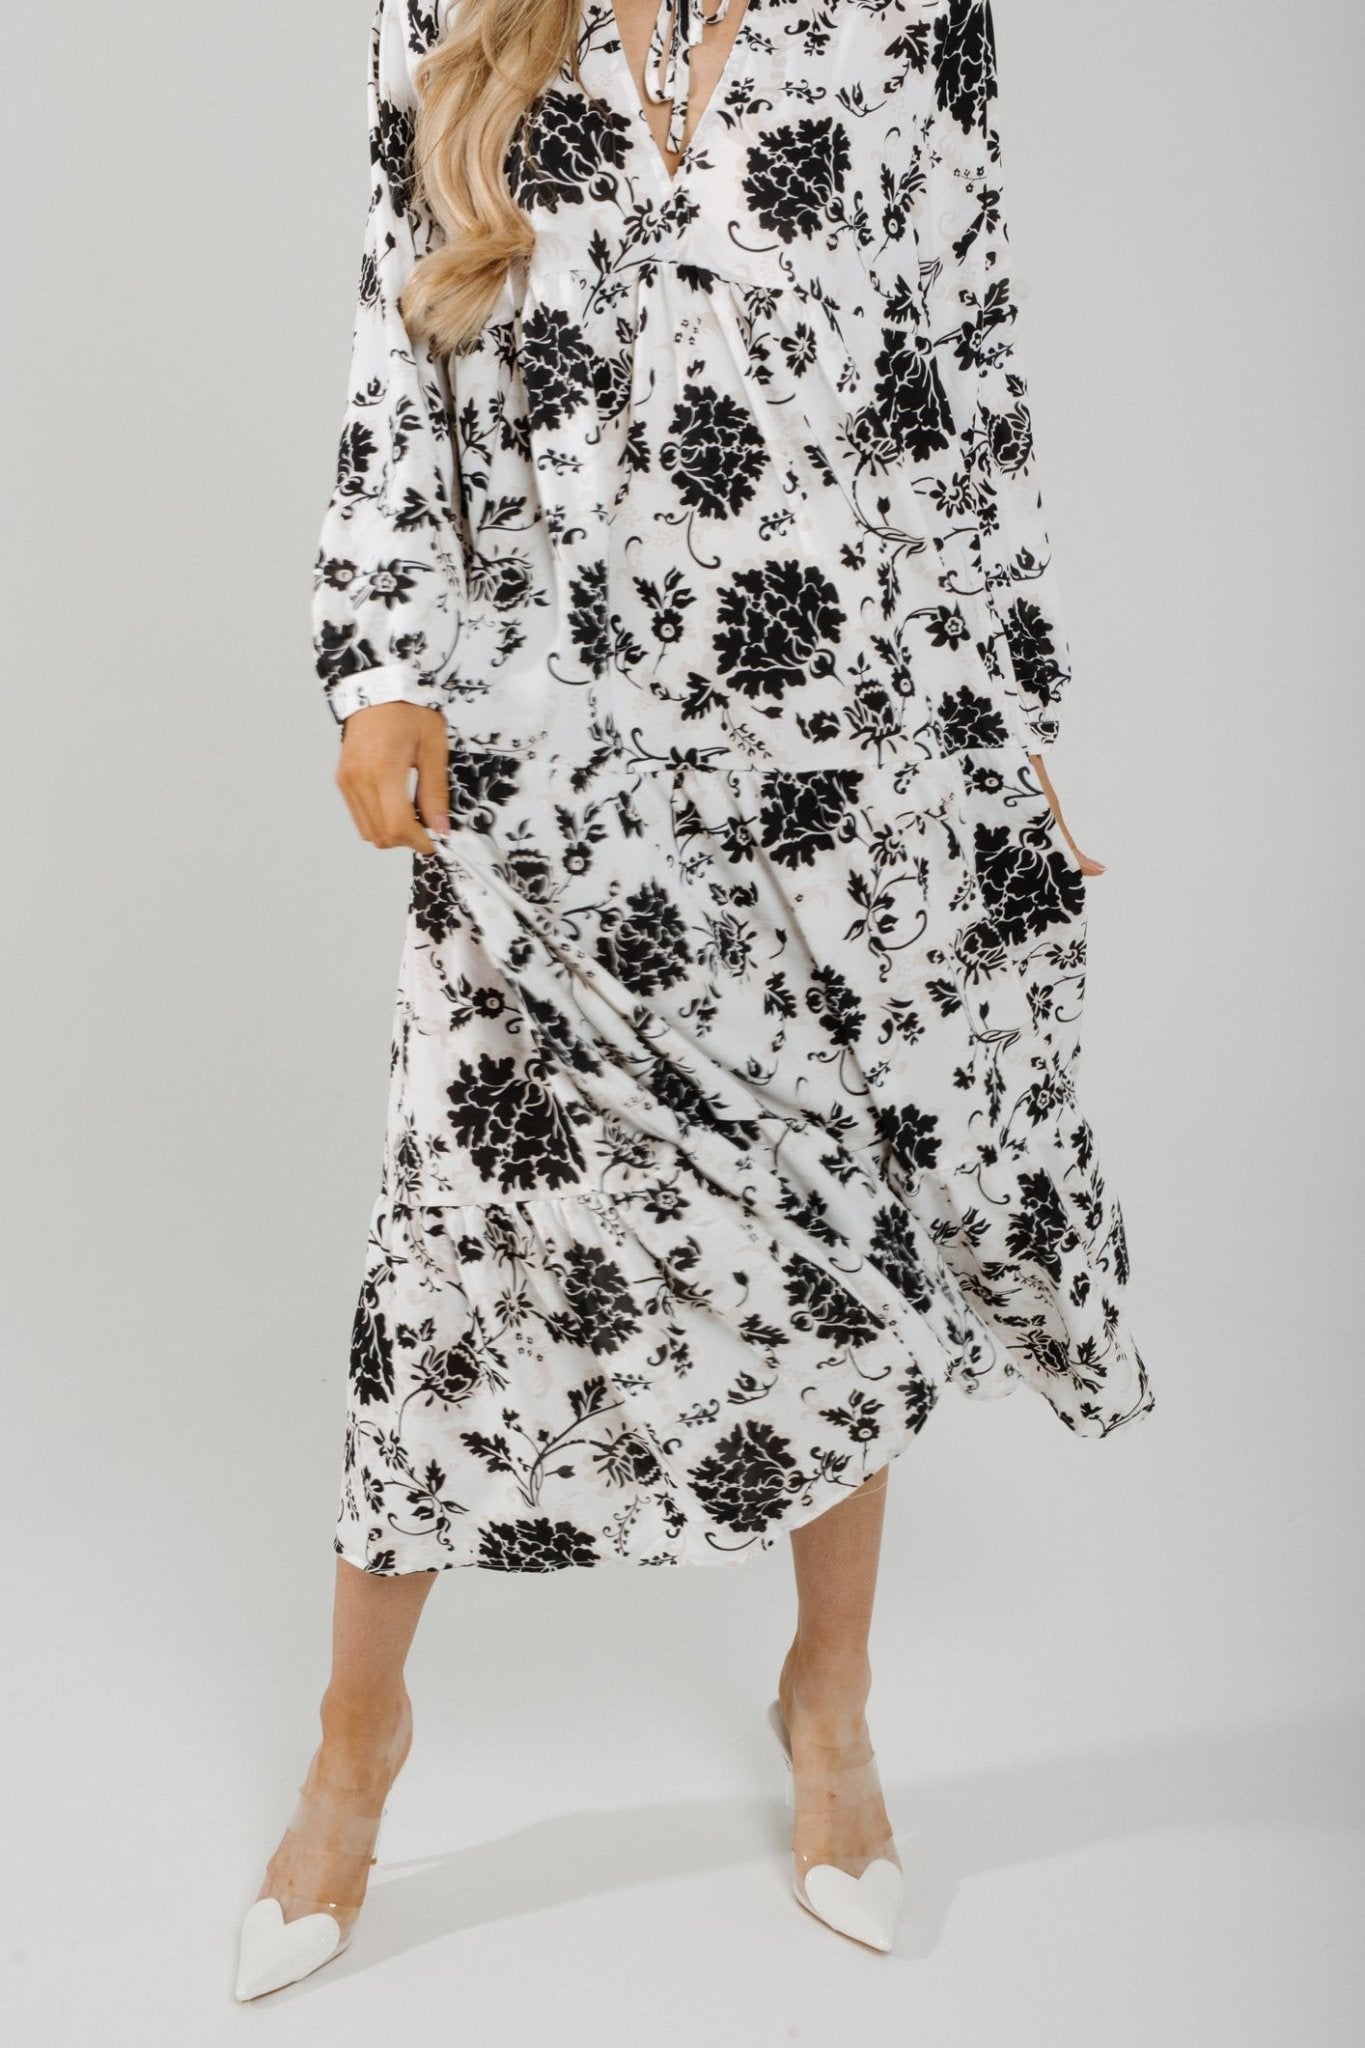 Polly Tiered Dress In Black & White - The Walk in Wardrobe